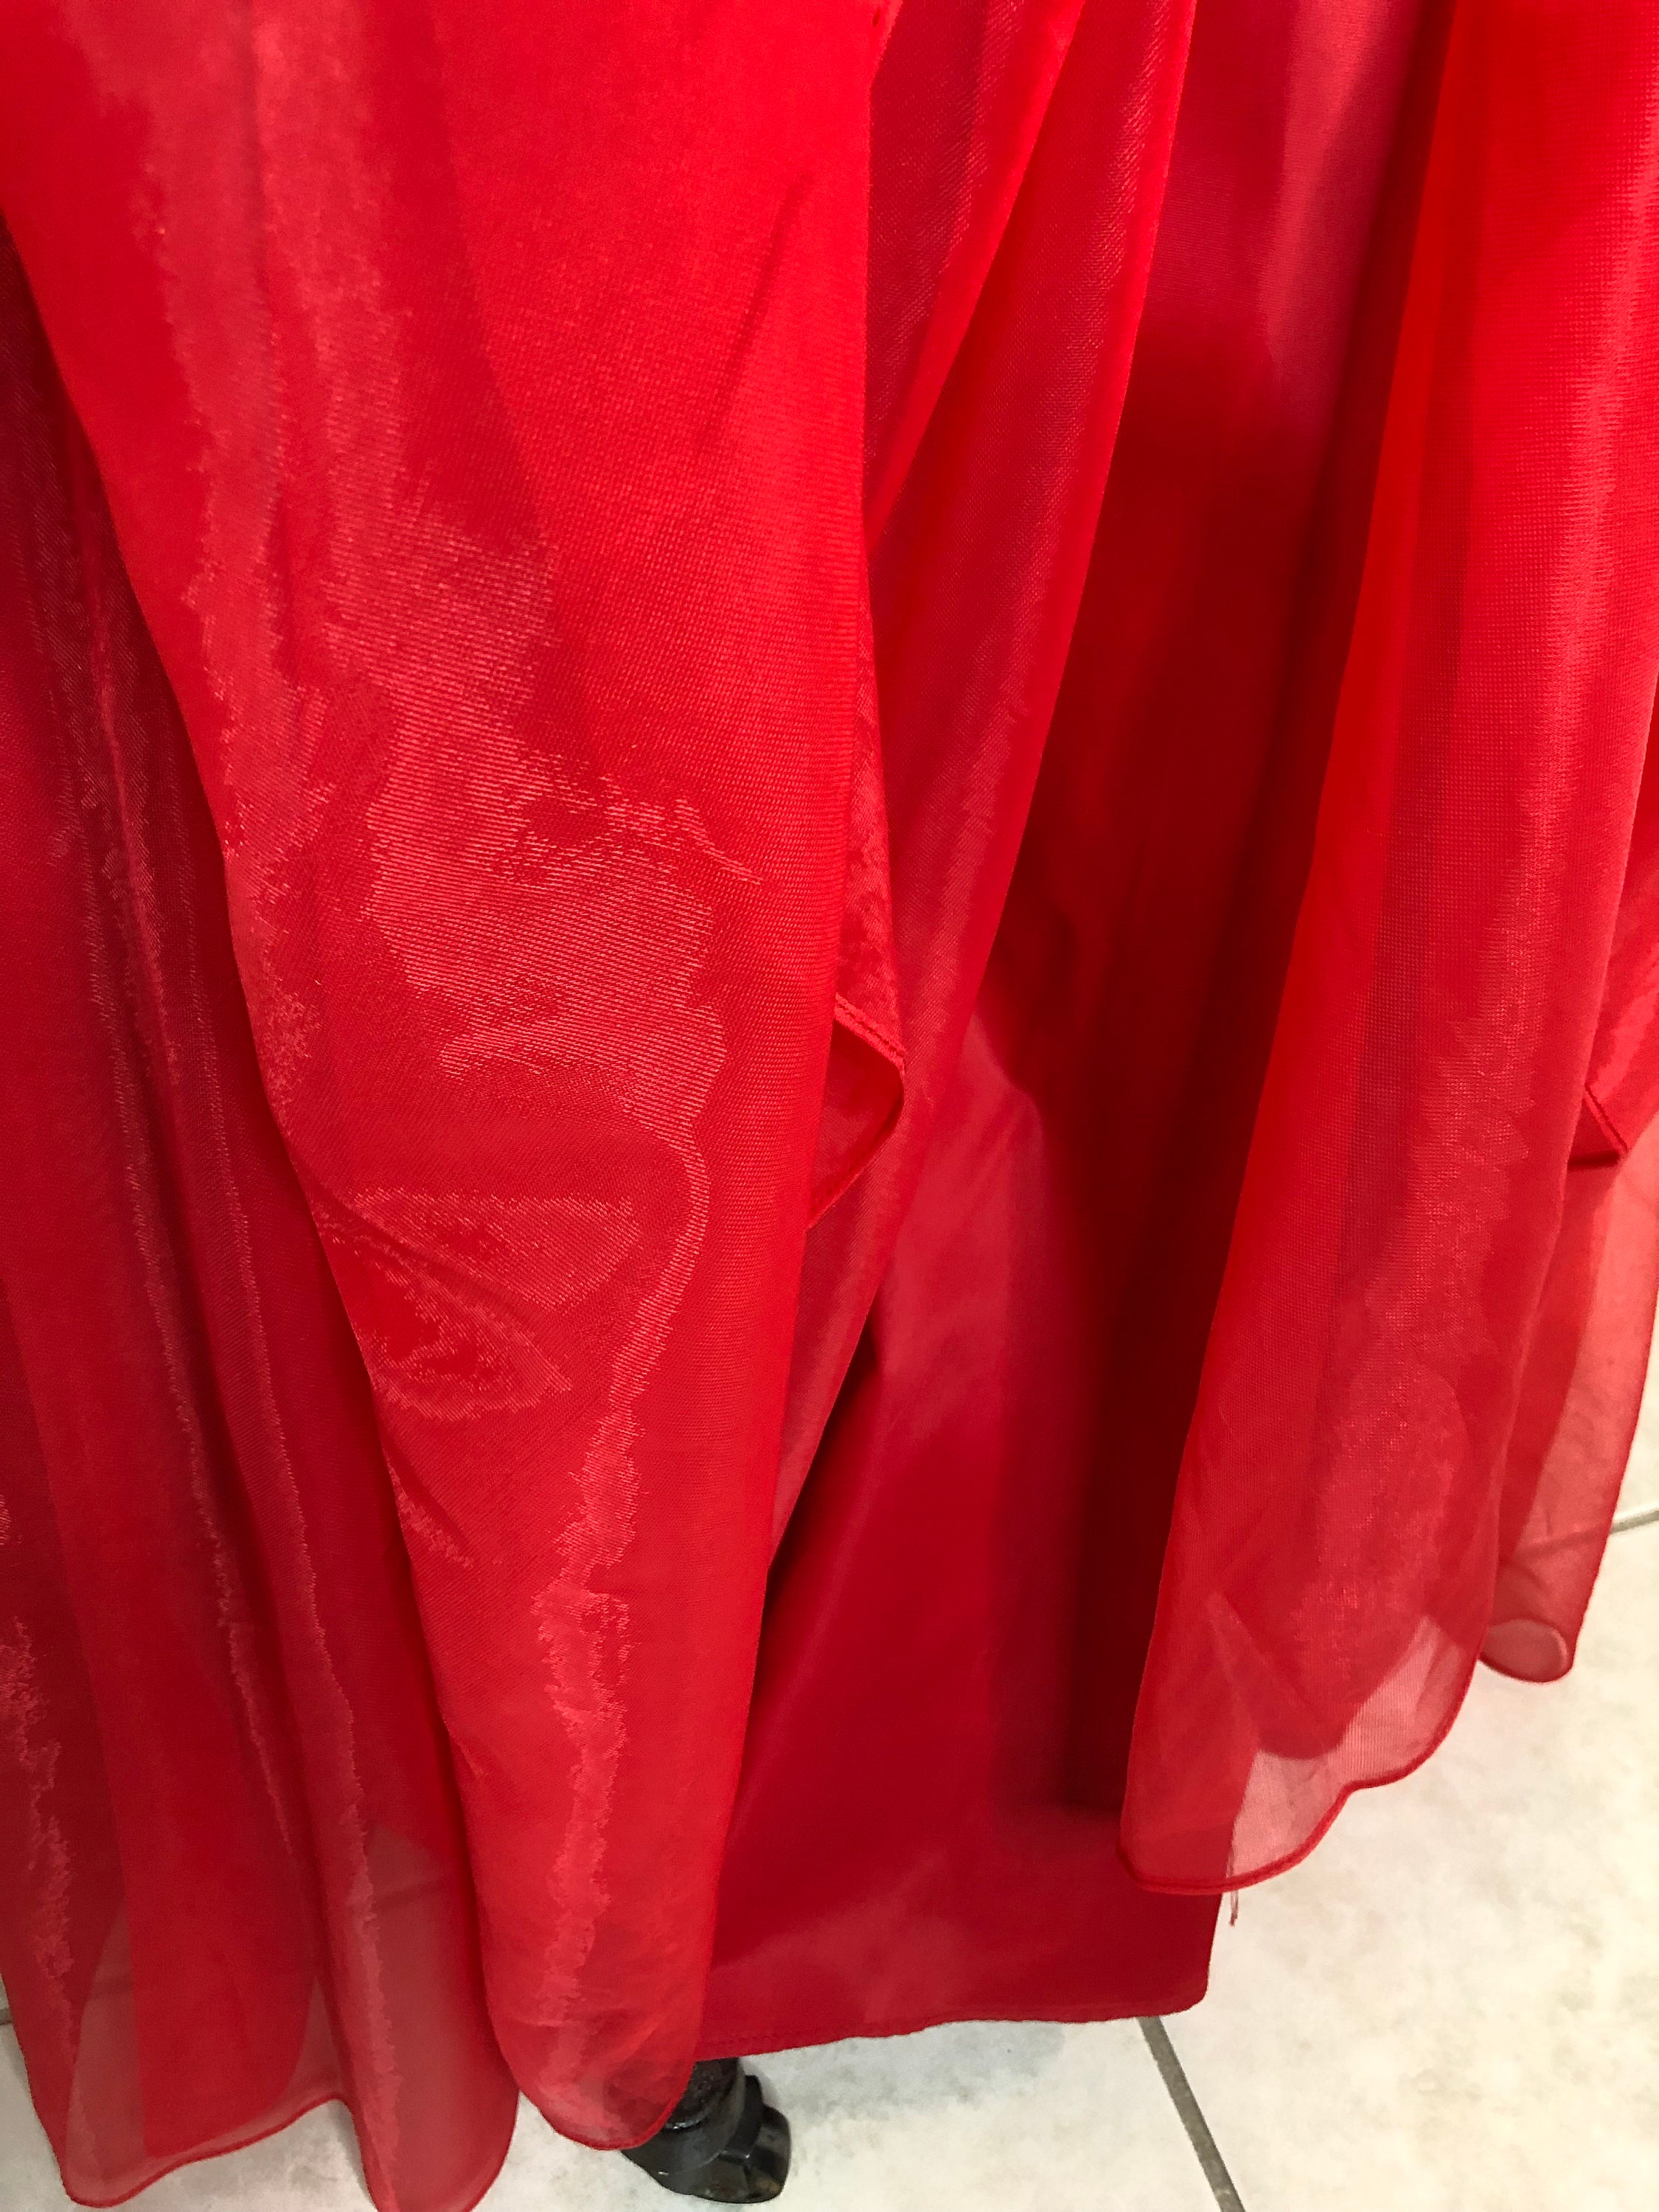 80's red gown chiffon maxi red dress prom gown | Etsy